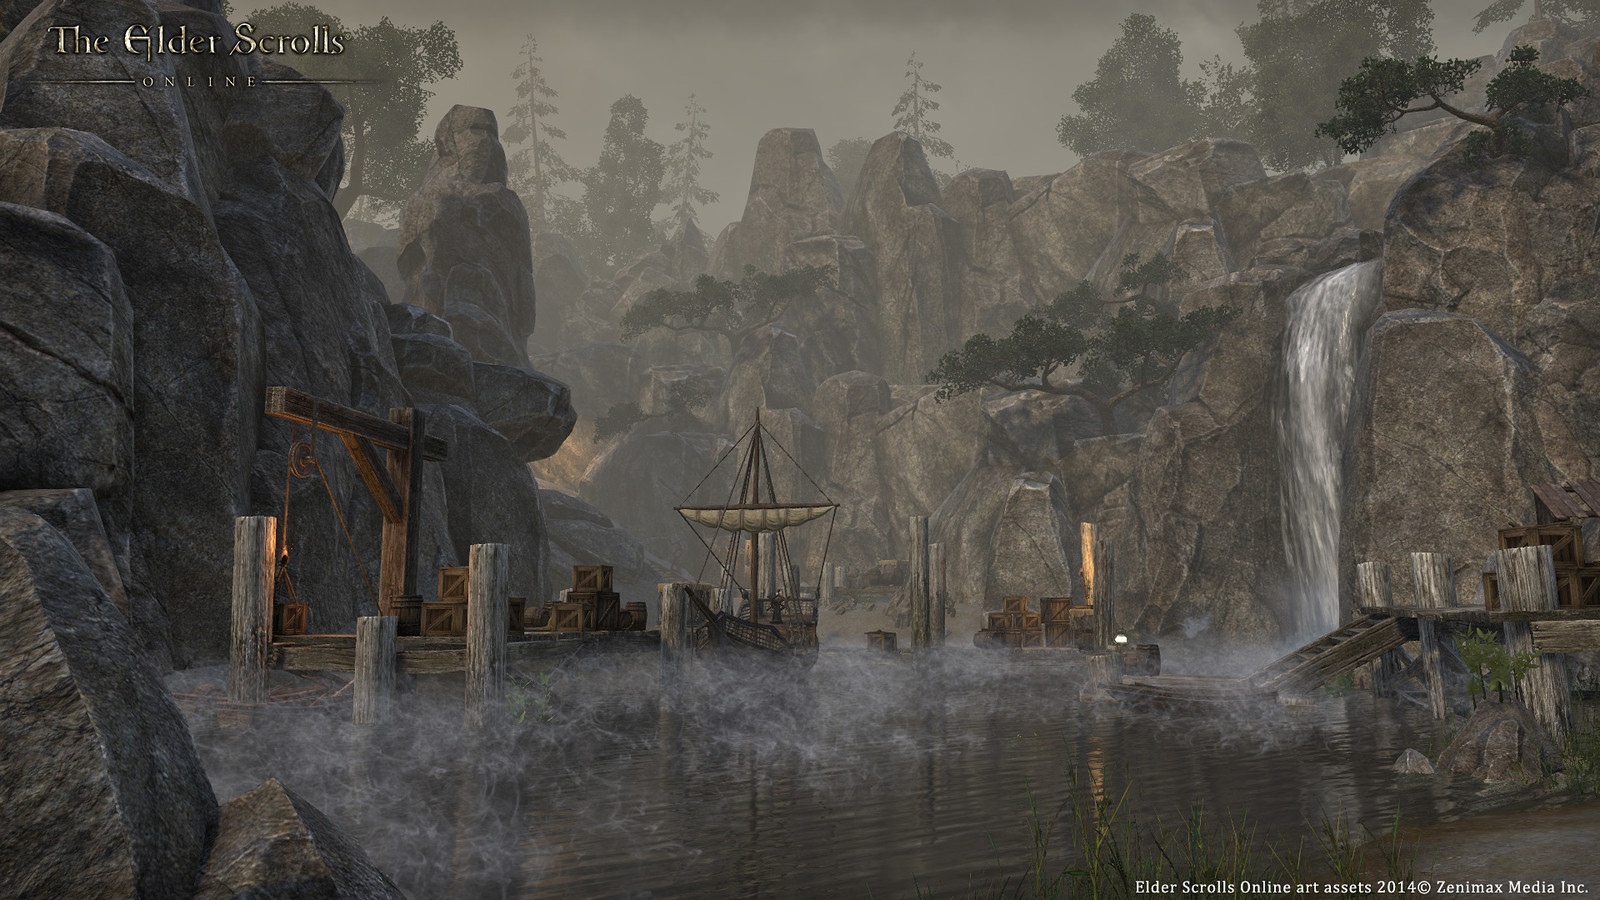 World building alpha pocket created for Elder Scrolls Online. All scene building and lighting done by myself. Asset creation included myself and multiple team members.